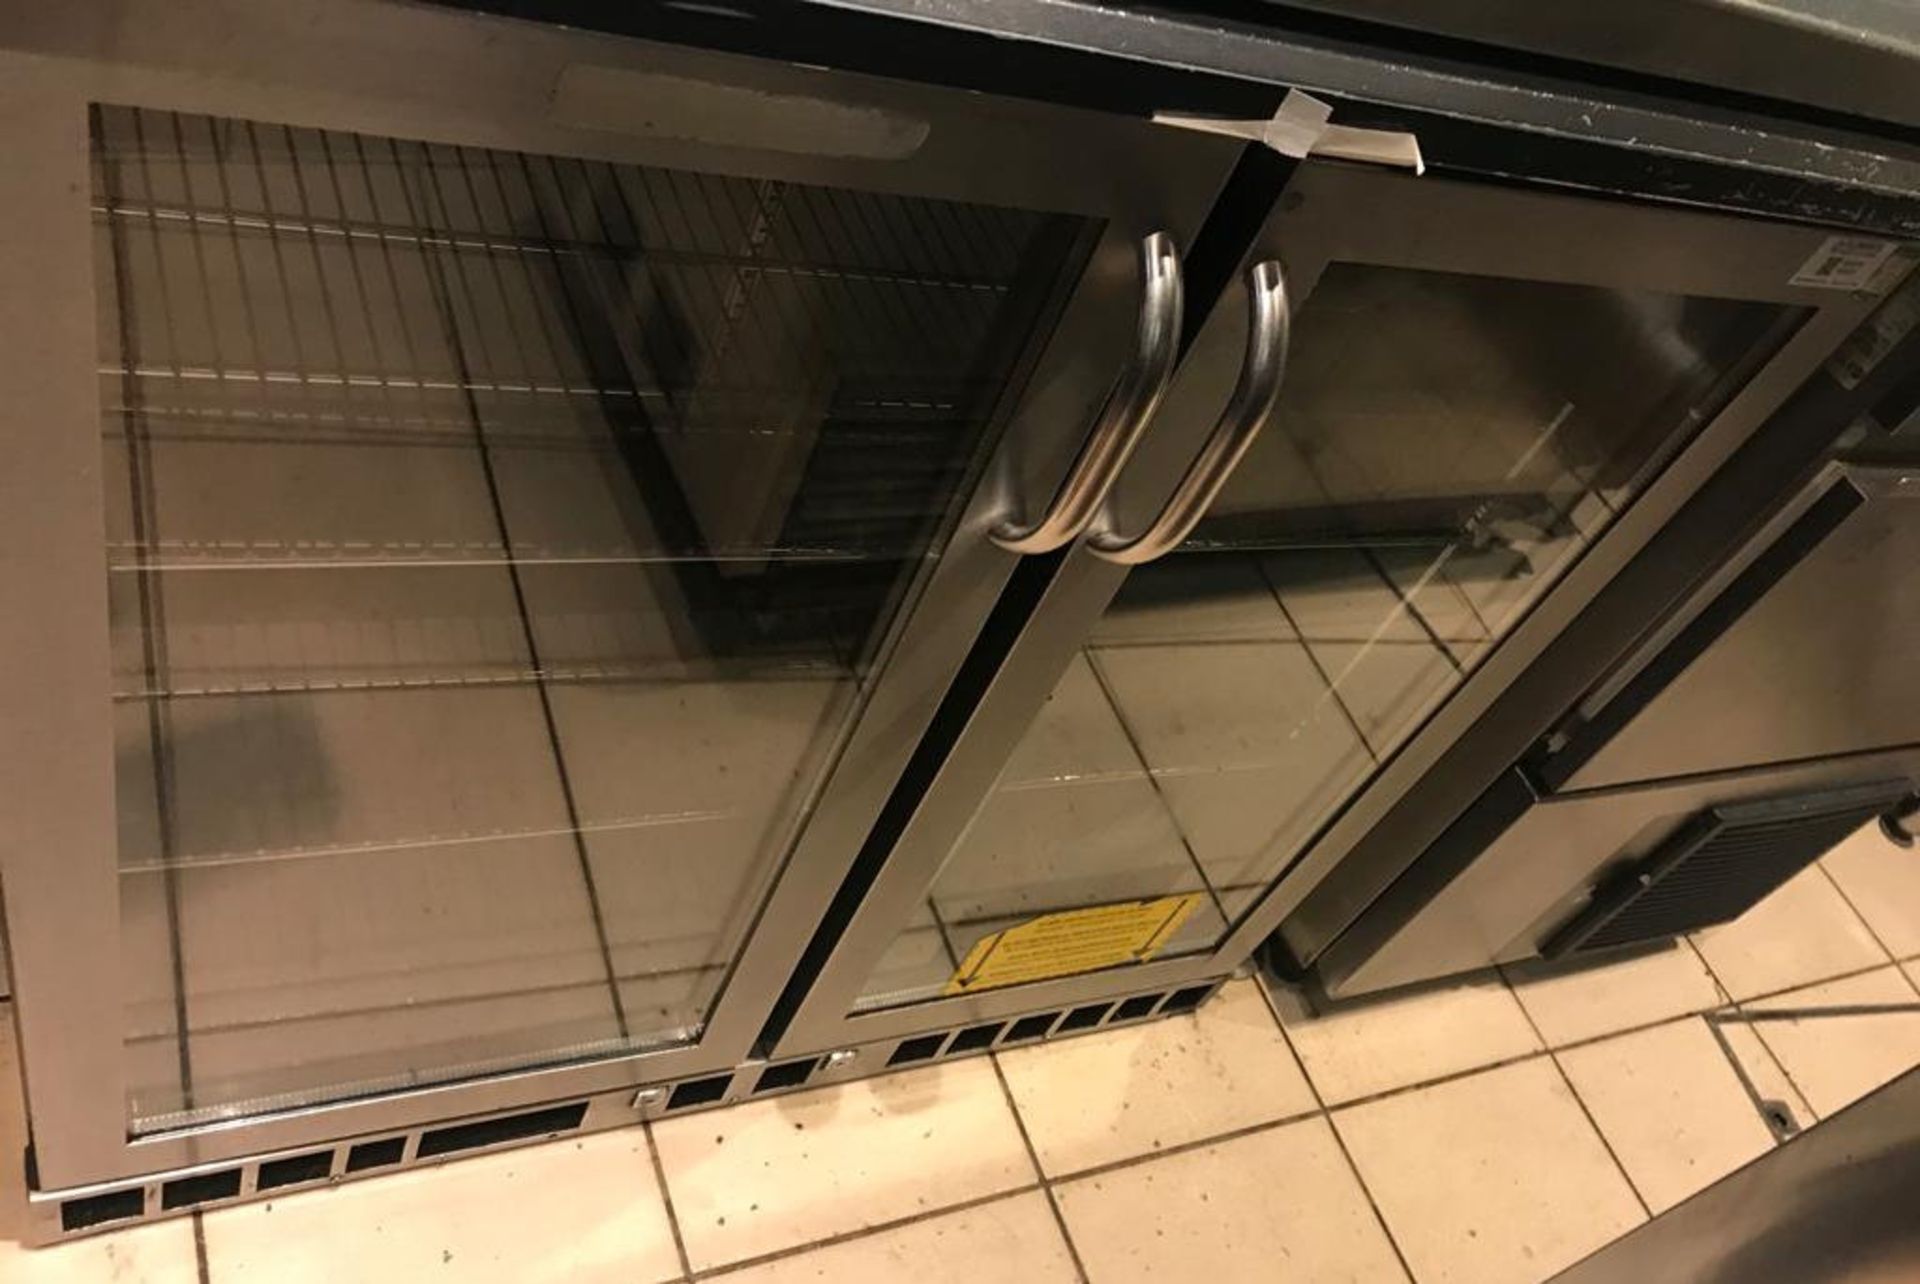 1 x Double Glass Door Bottle Fridge - Recently removed from London premises of a well-known